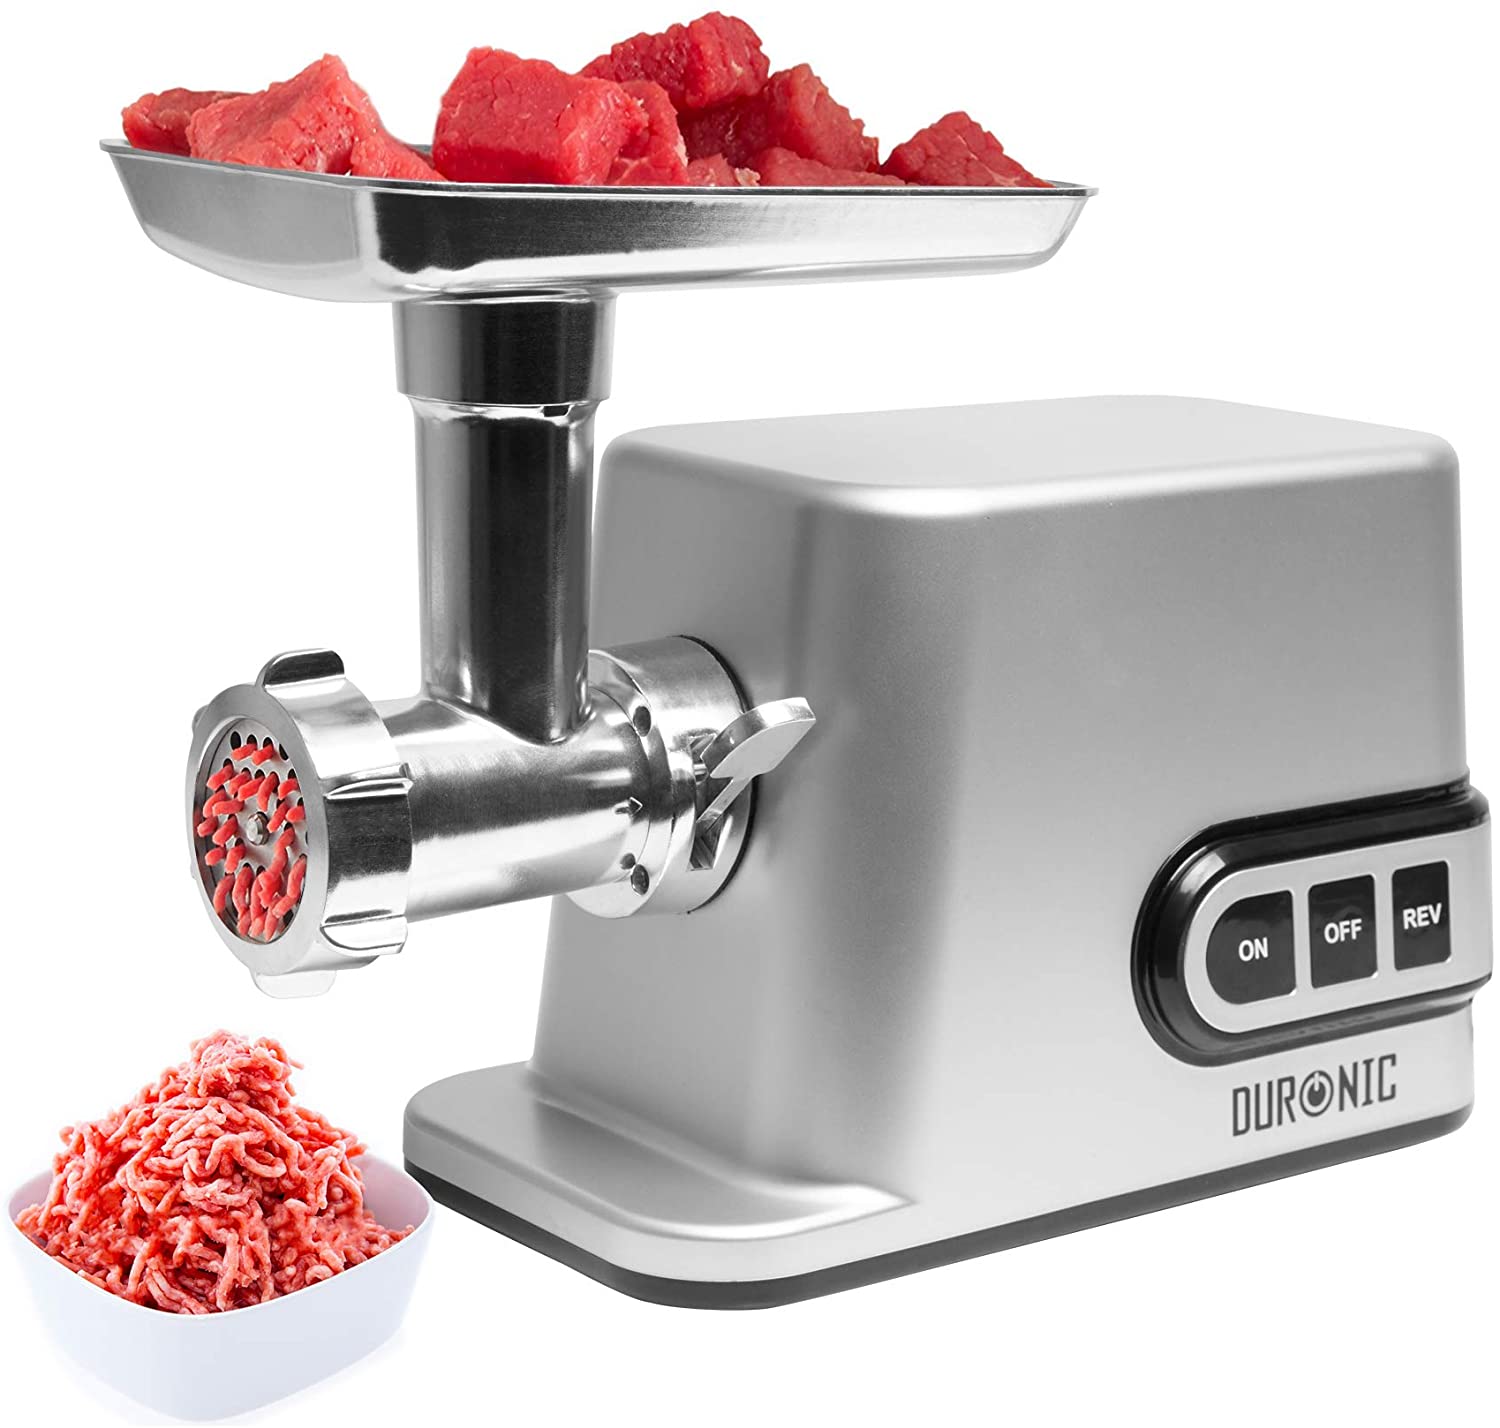 Duronic MG301 Electric Meat Grinder / Sausage Machine / Minced Meat Machine with Sausage and Keb Attachment 3000 Watt